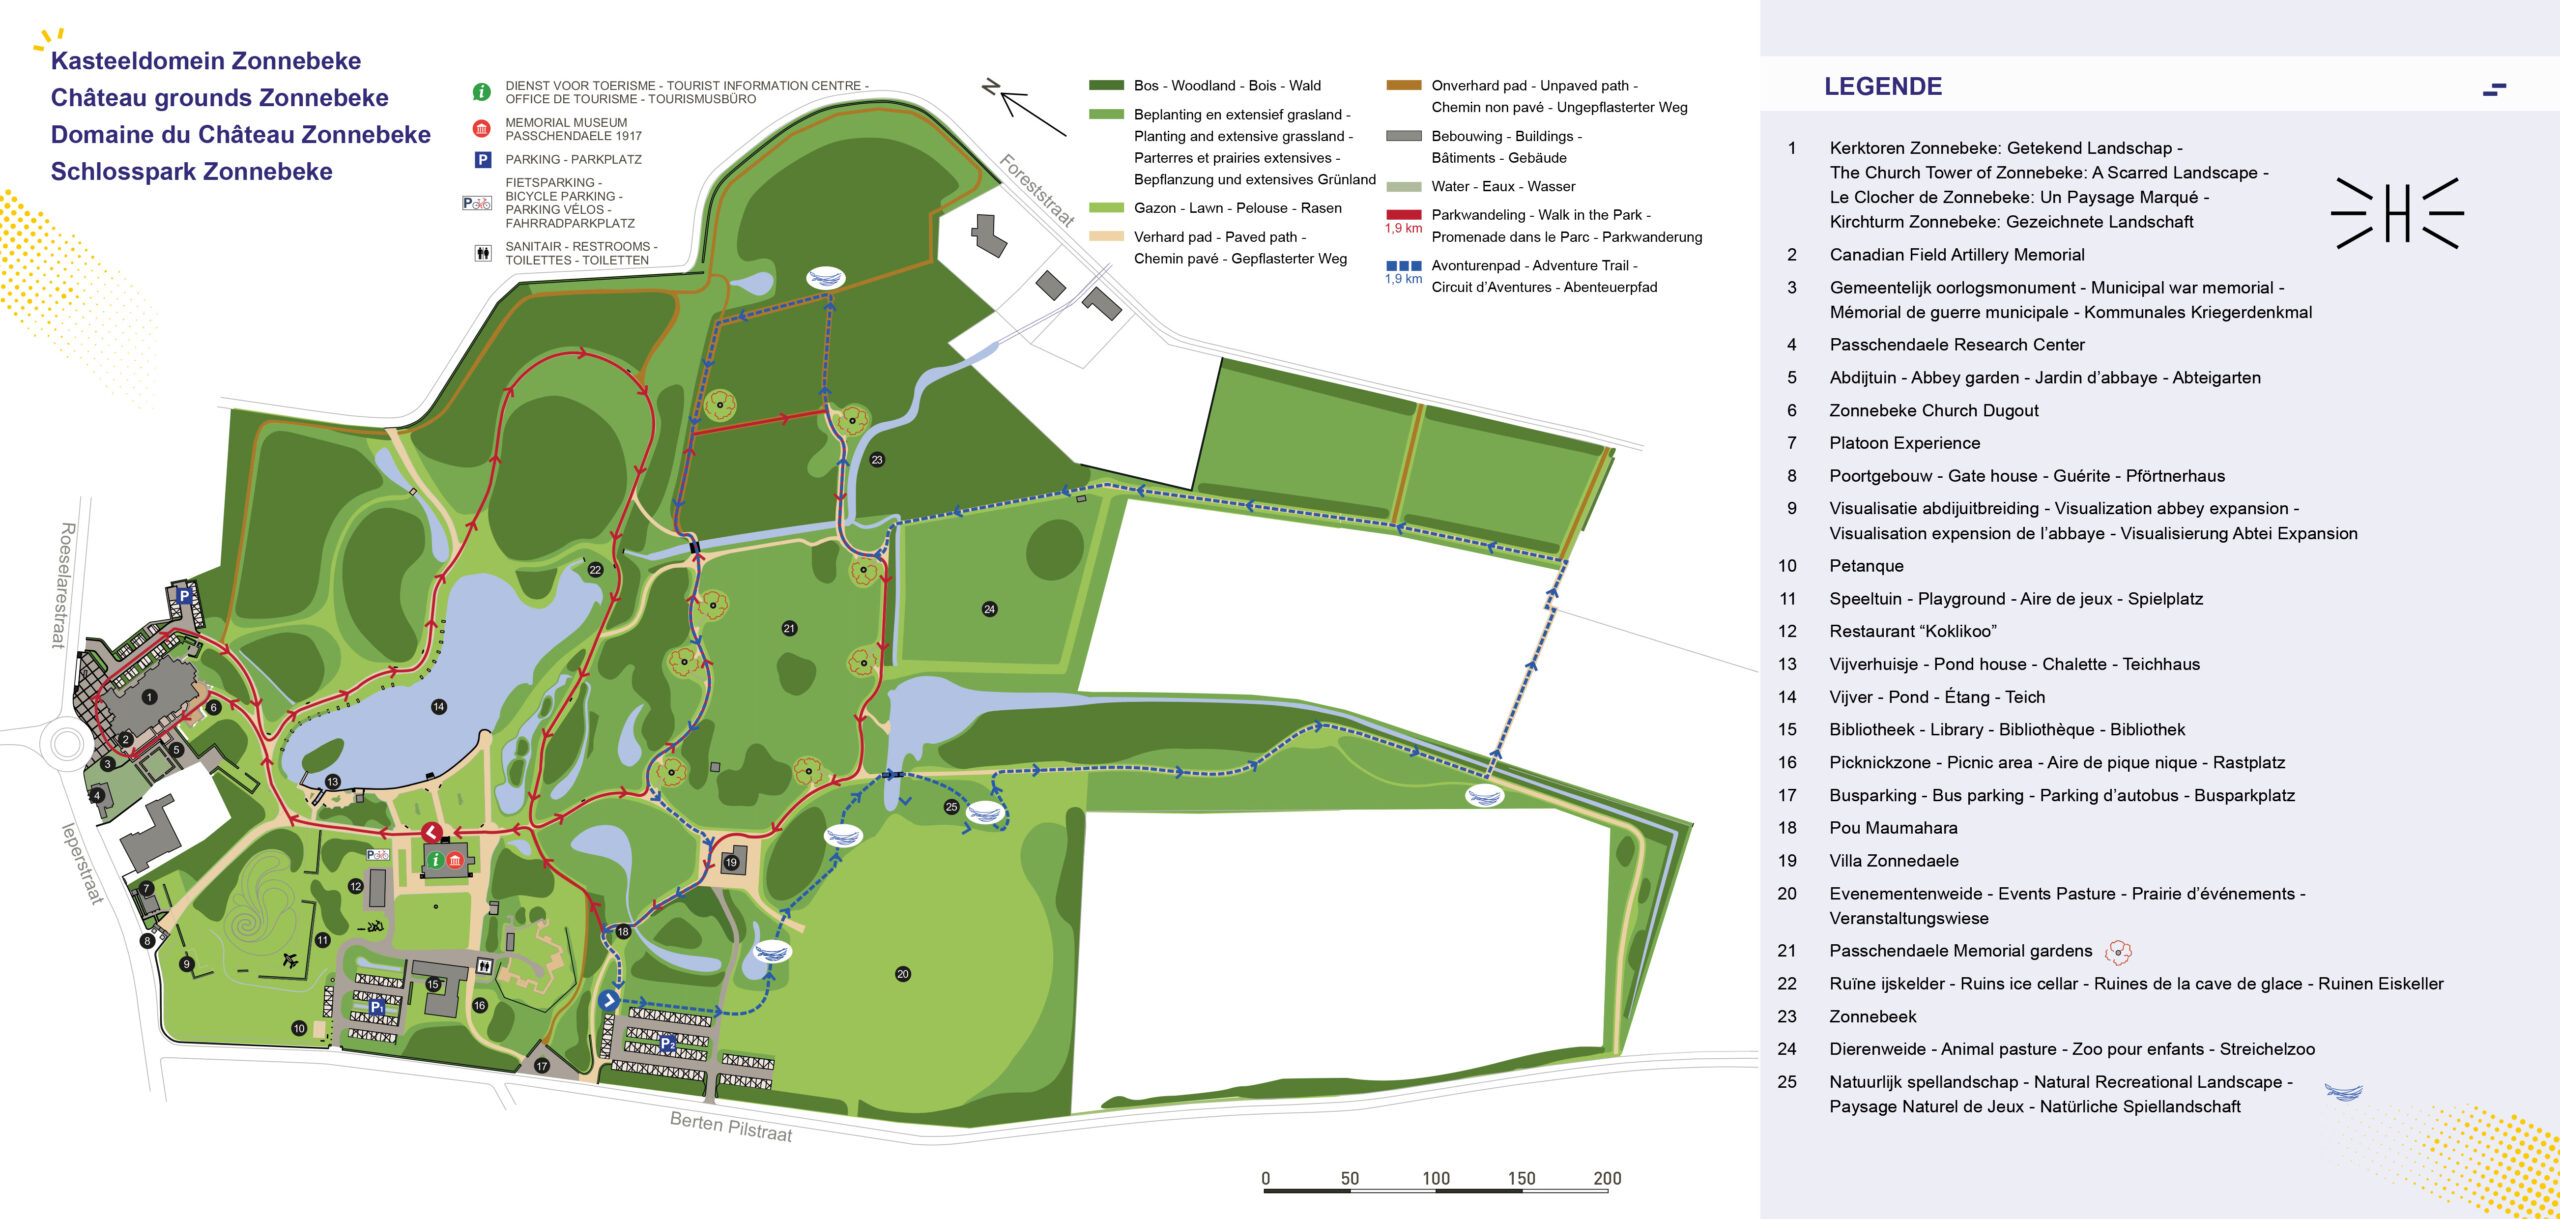 Map of Chateau Grounds Zonnebeke